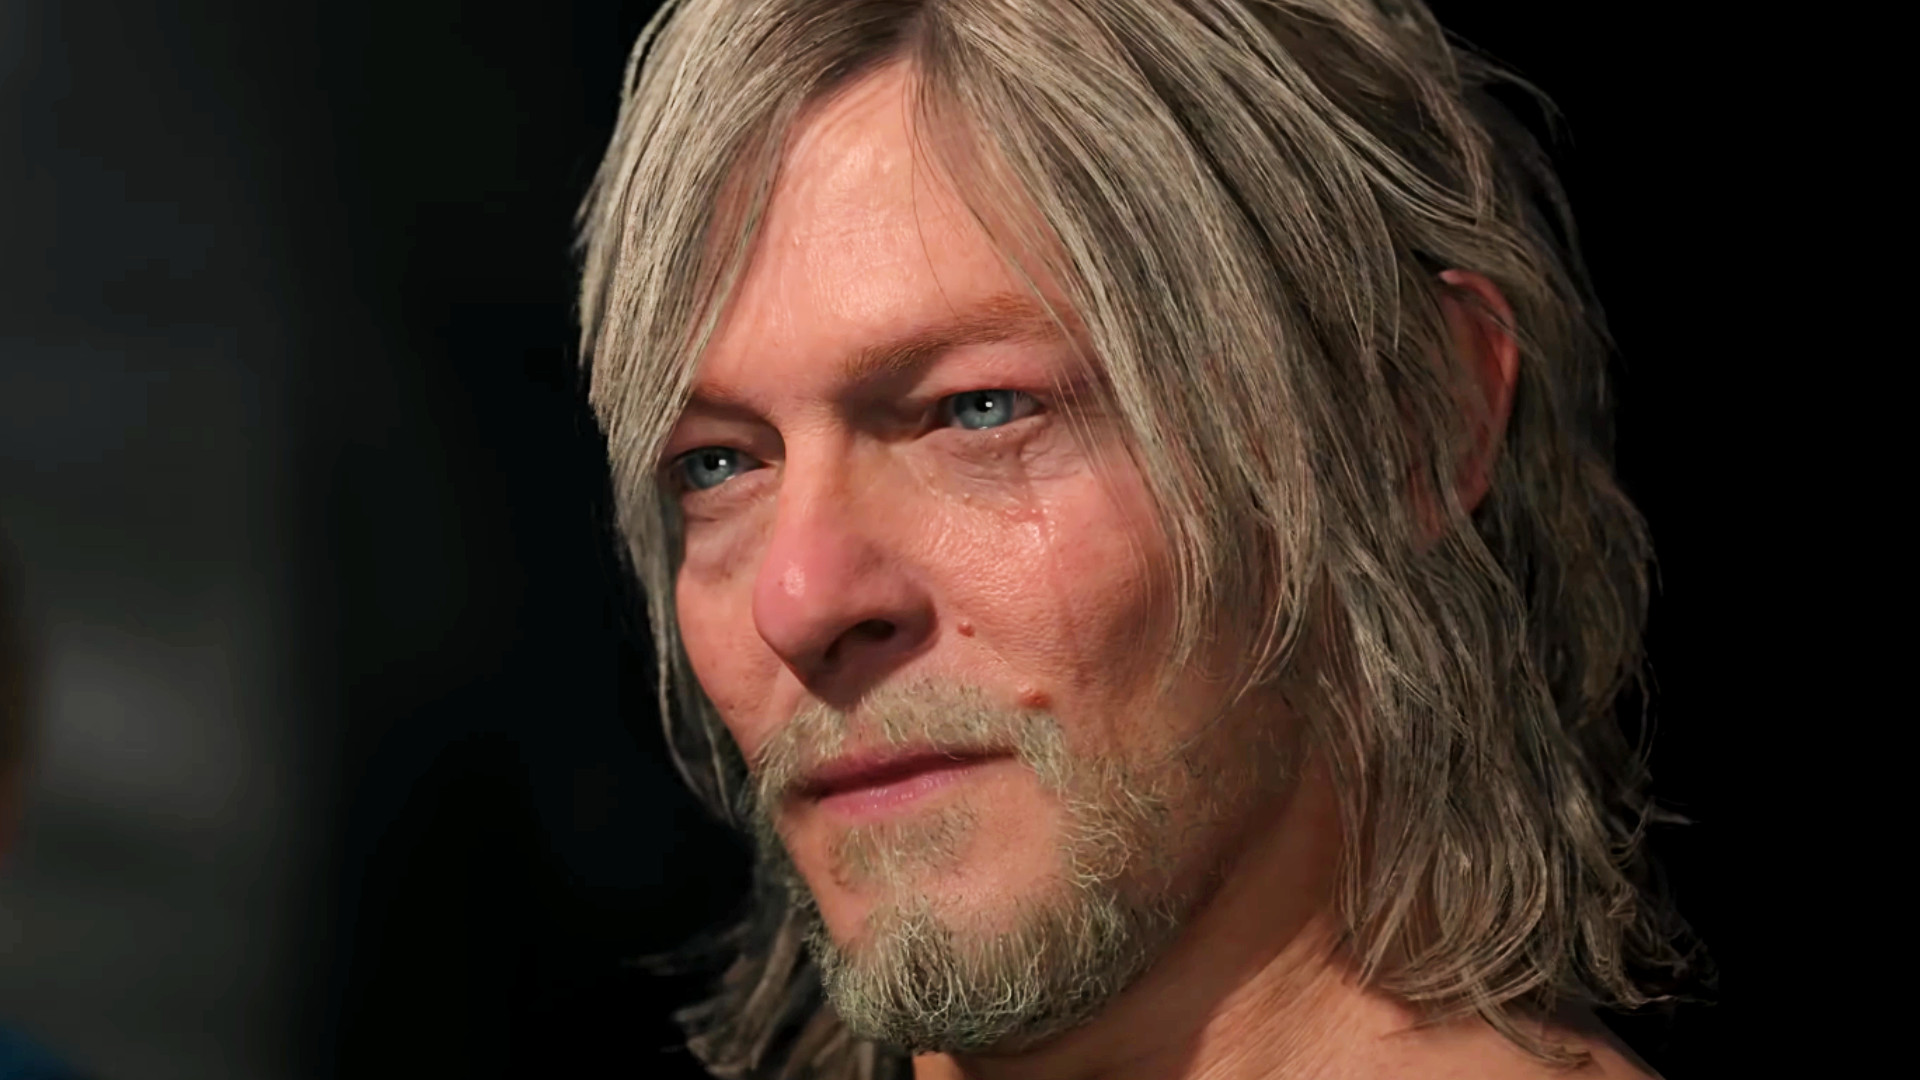 Death Stranding 2 revealed by Hideo Kojima at The Game Awards 2022